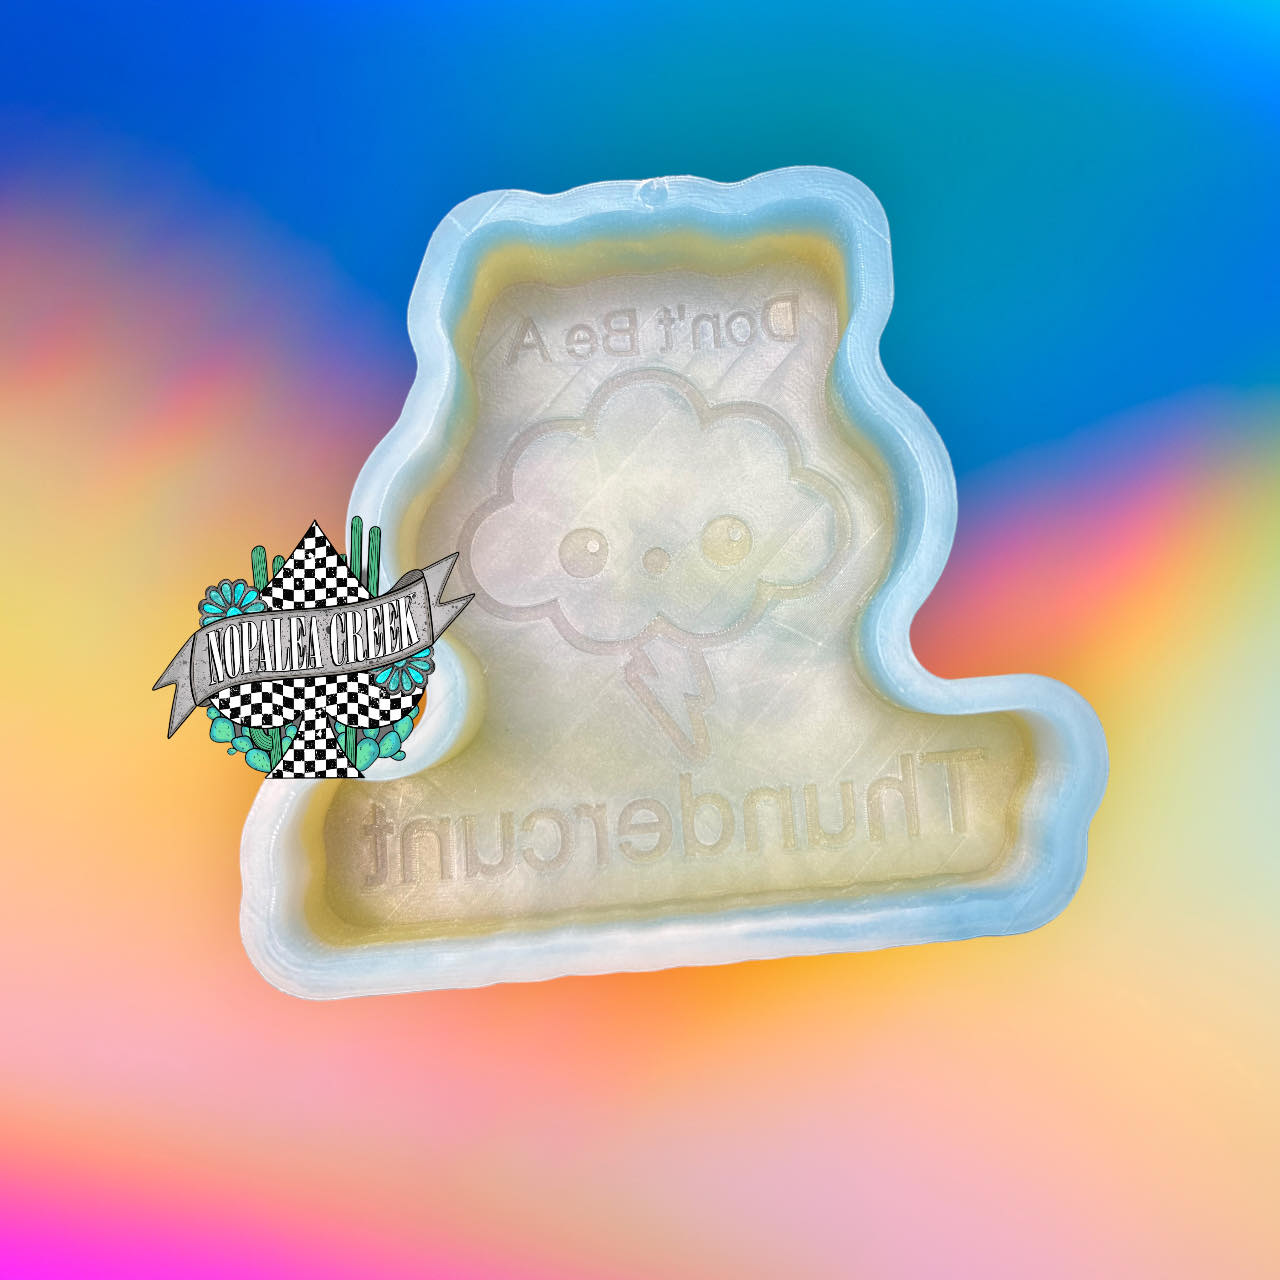 (B102) Thunder Cunt Silicone Mold